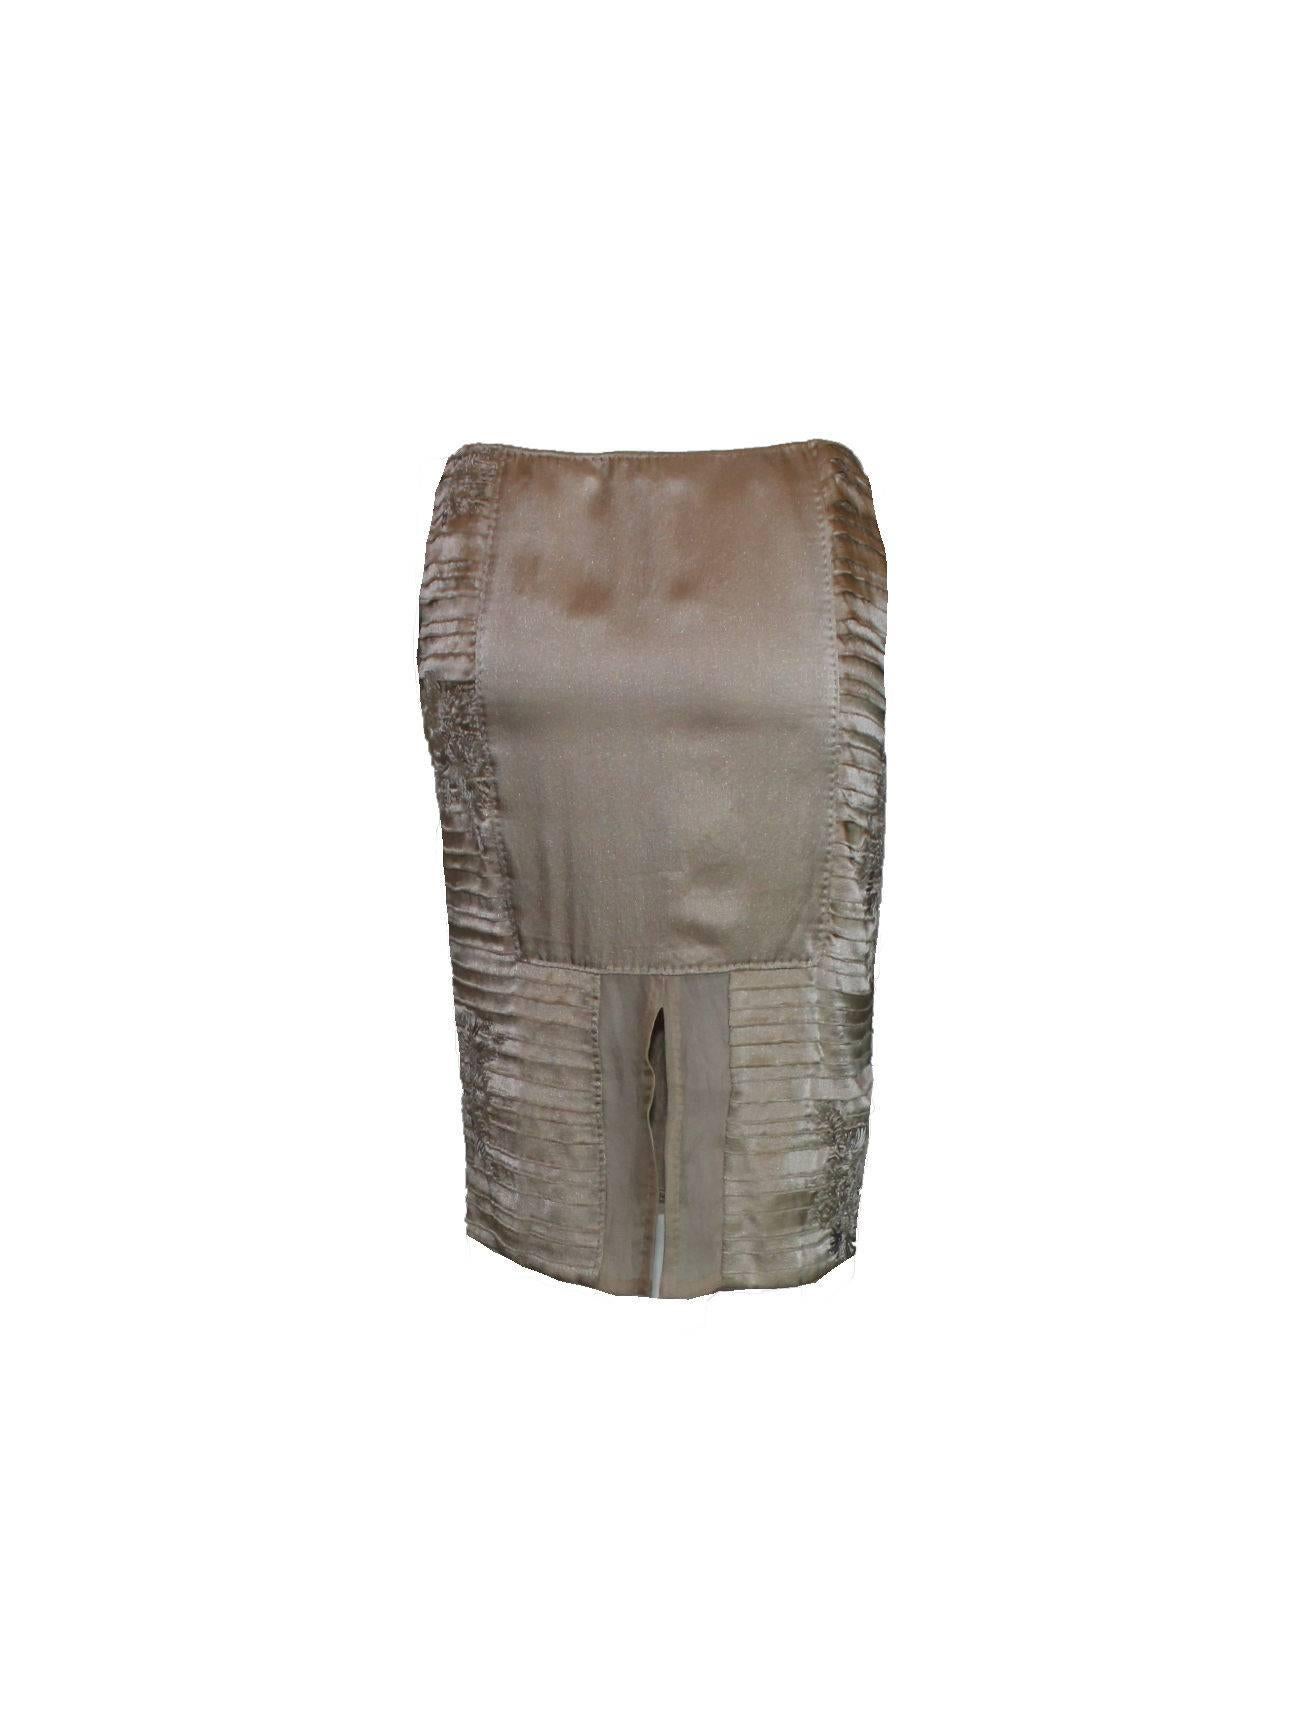 Stunning silk skirt by Tom Ford for Gucci
From his famous SS 2003 collection
Beautiful ombre layered silk
See-through panels
Hand-embroidery
Stunning piece
Made in Italy
Dry Clean Only